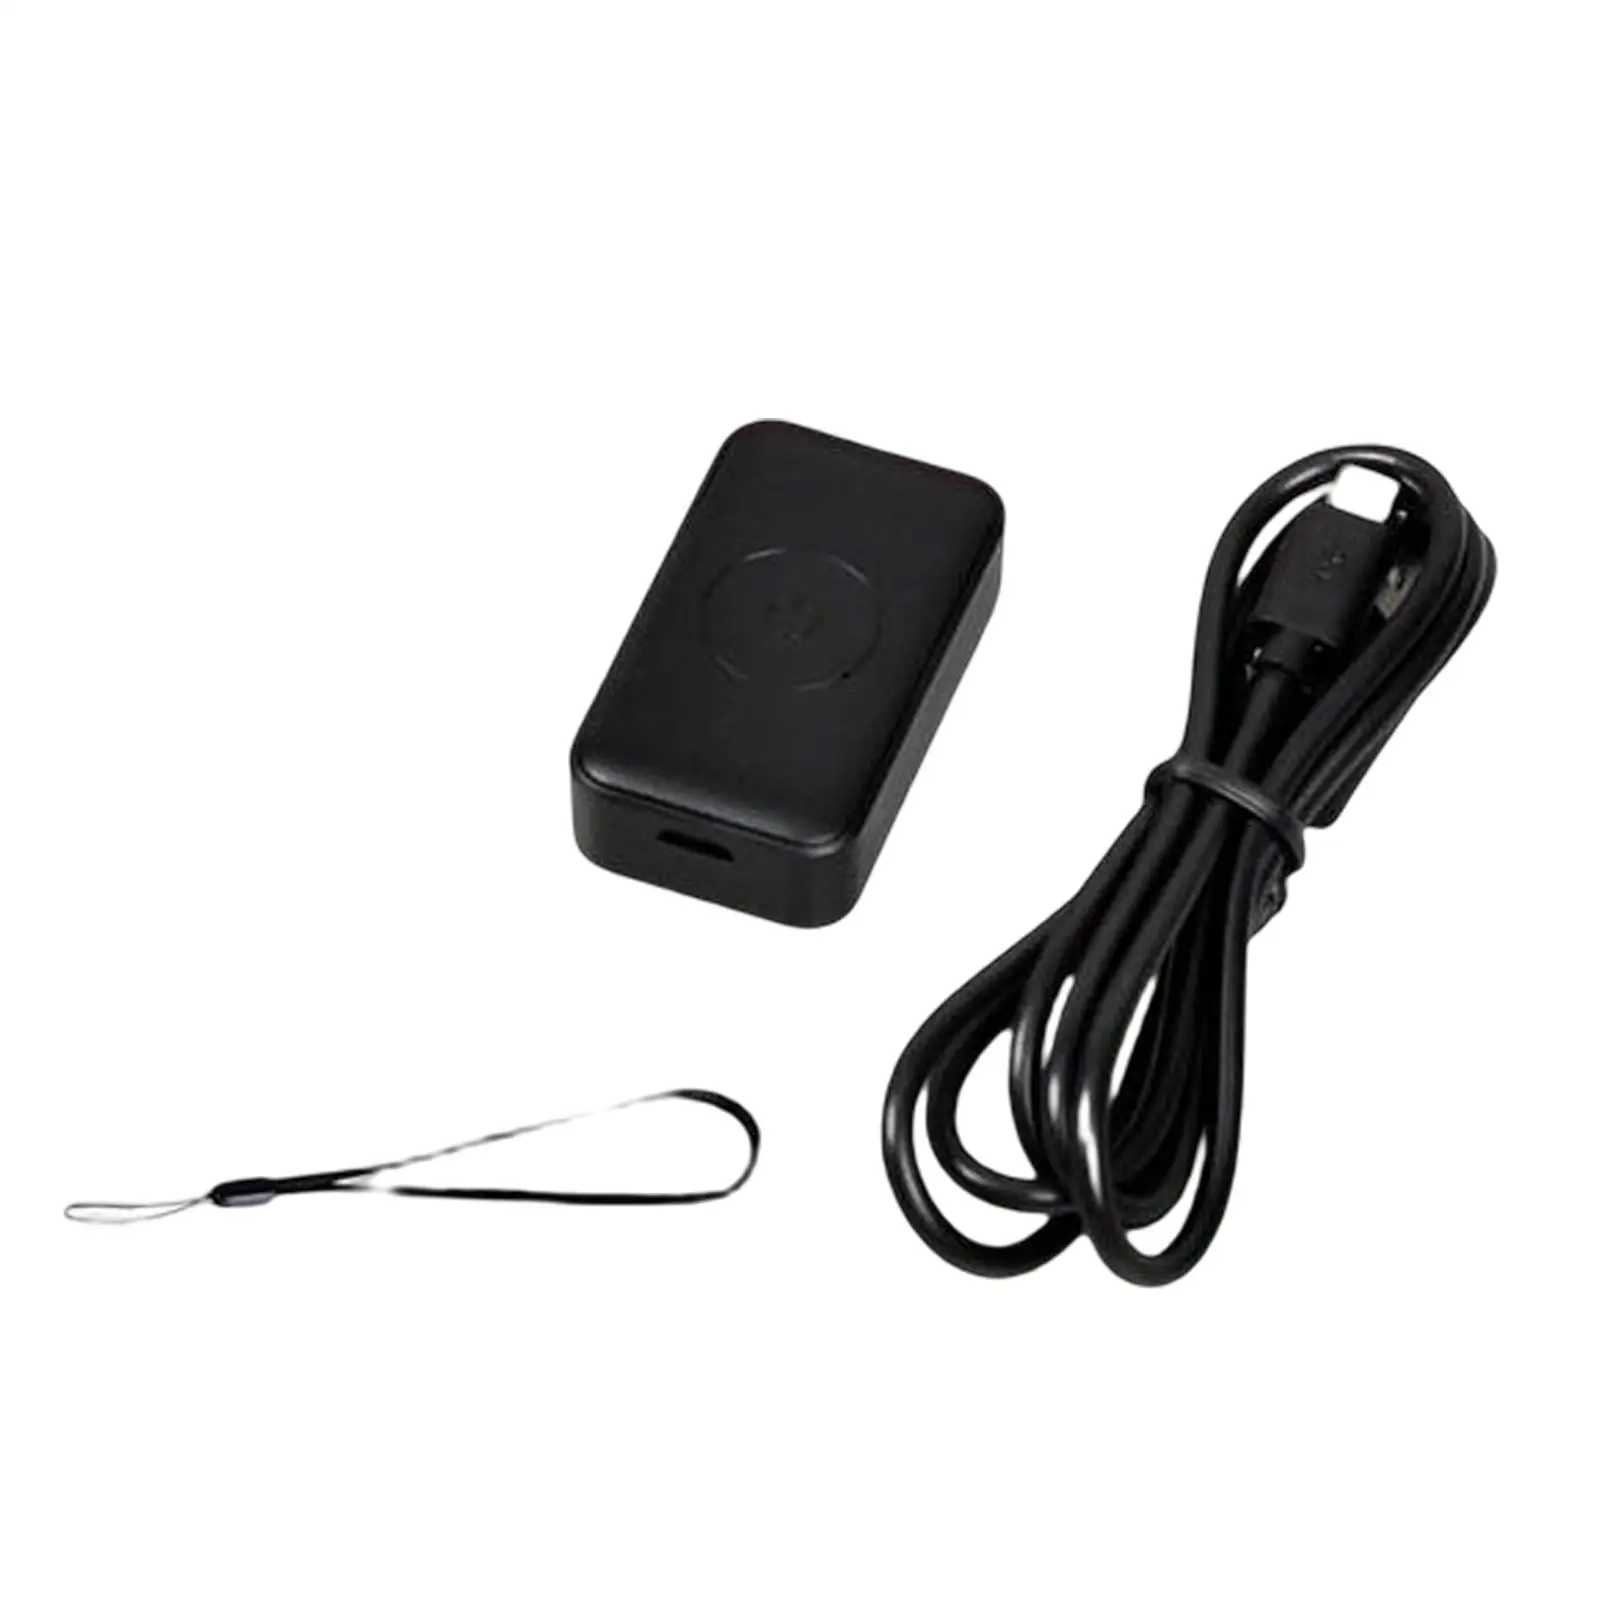 G03  Portable Vibration Alarm Multiple Devices Management SOS Call   Device for  Motorcycles Trucks